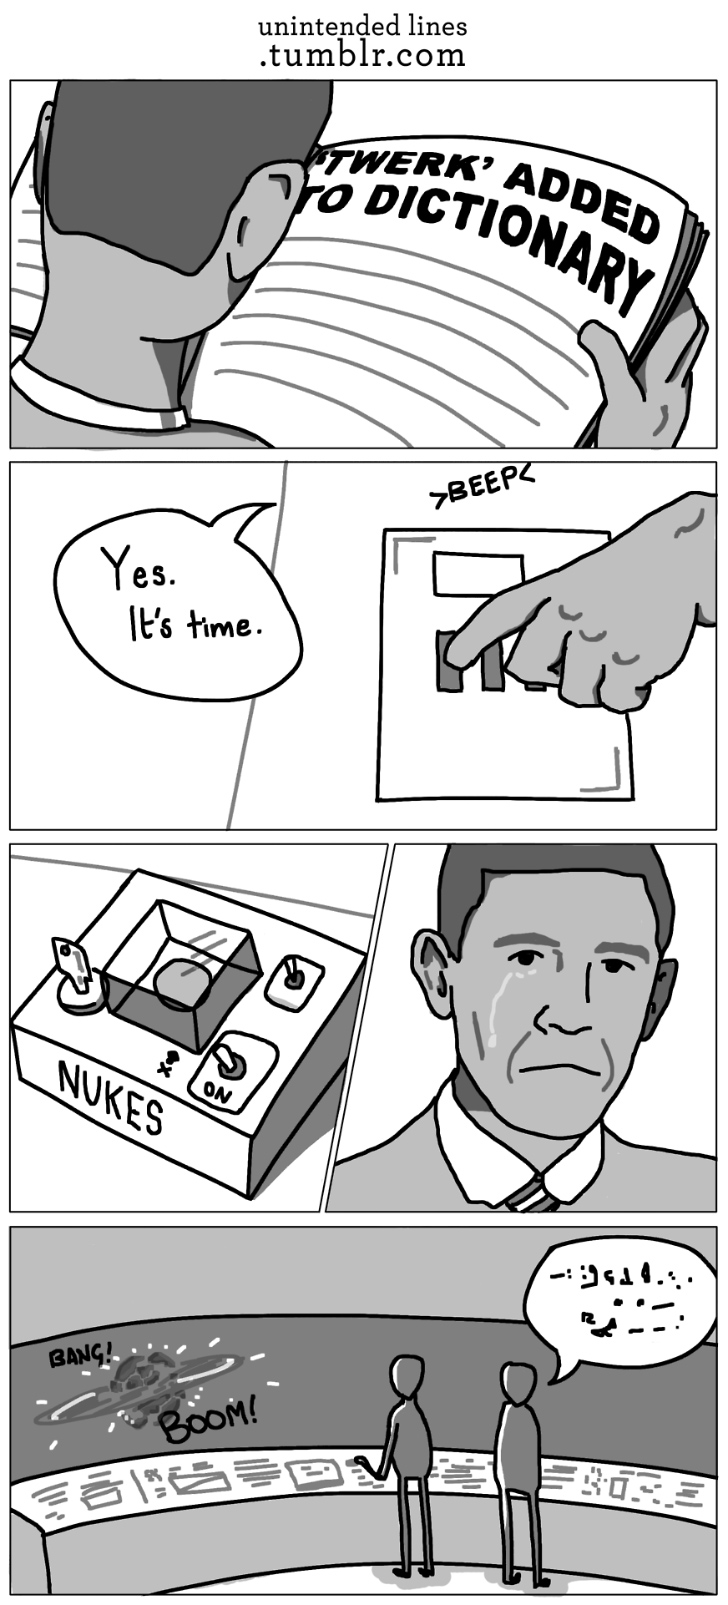 funny memes and random pics - cartoon - Yes. It's time. Nukes On unintended lines .tumblr.com Bang! Boom! 116 Twerk' Added Dictionary ro >Beep Tahi 14... Fore